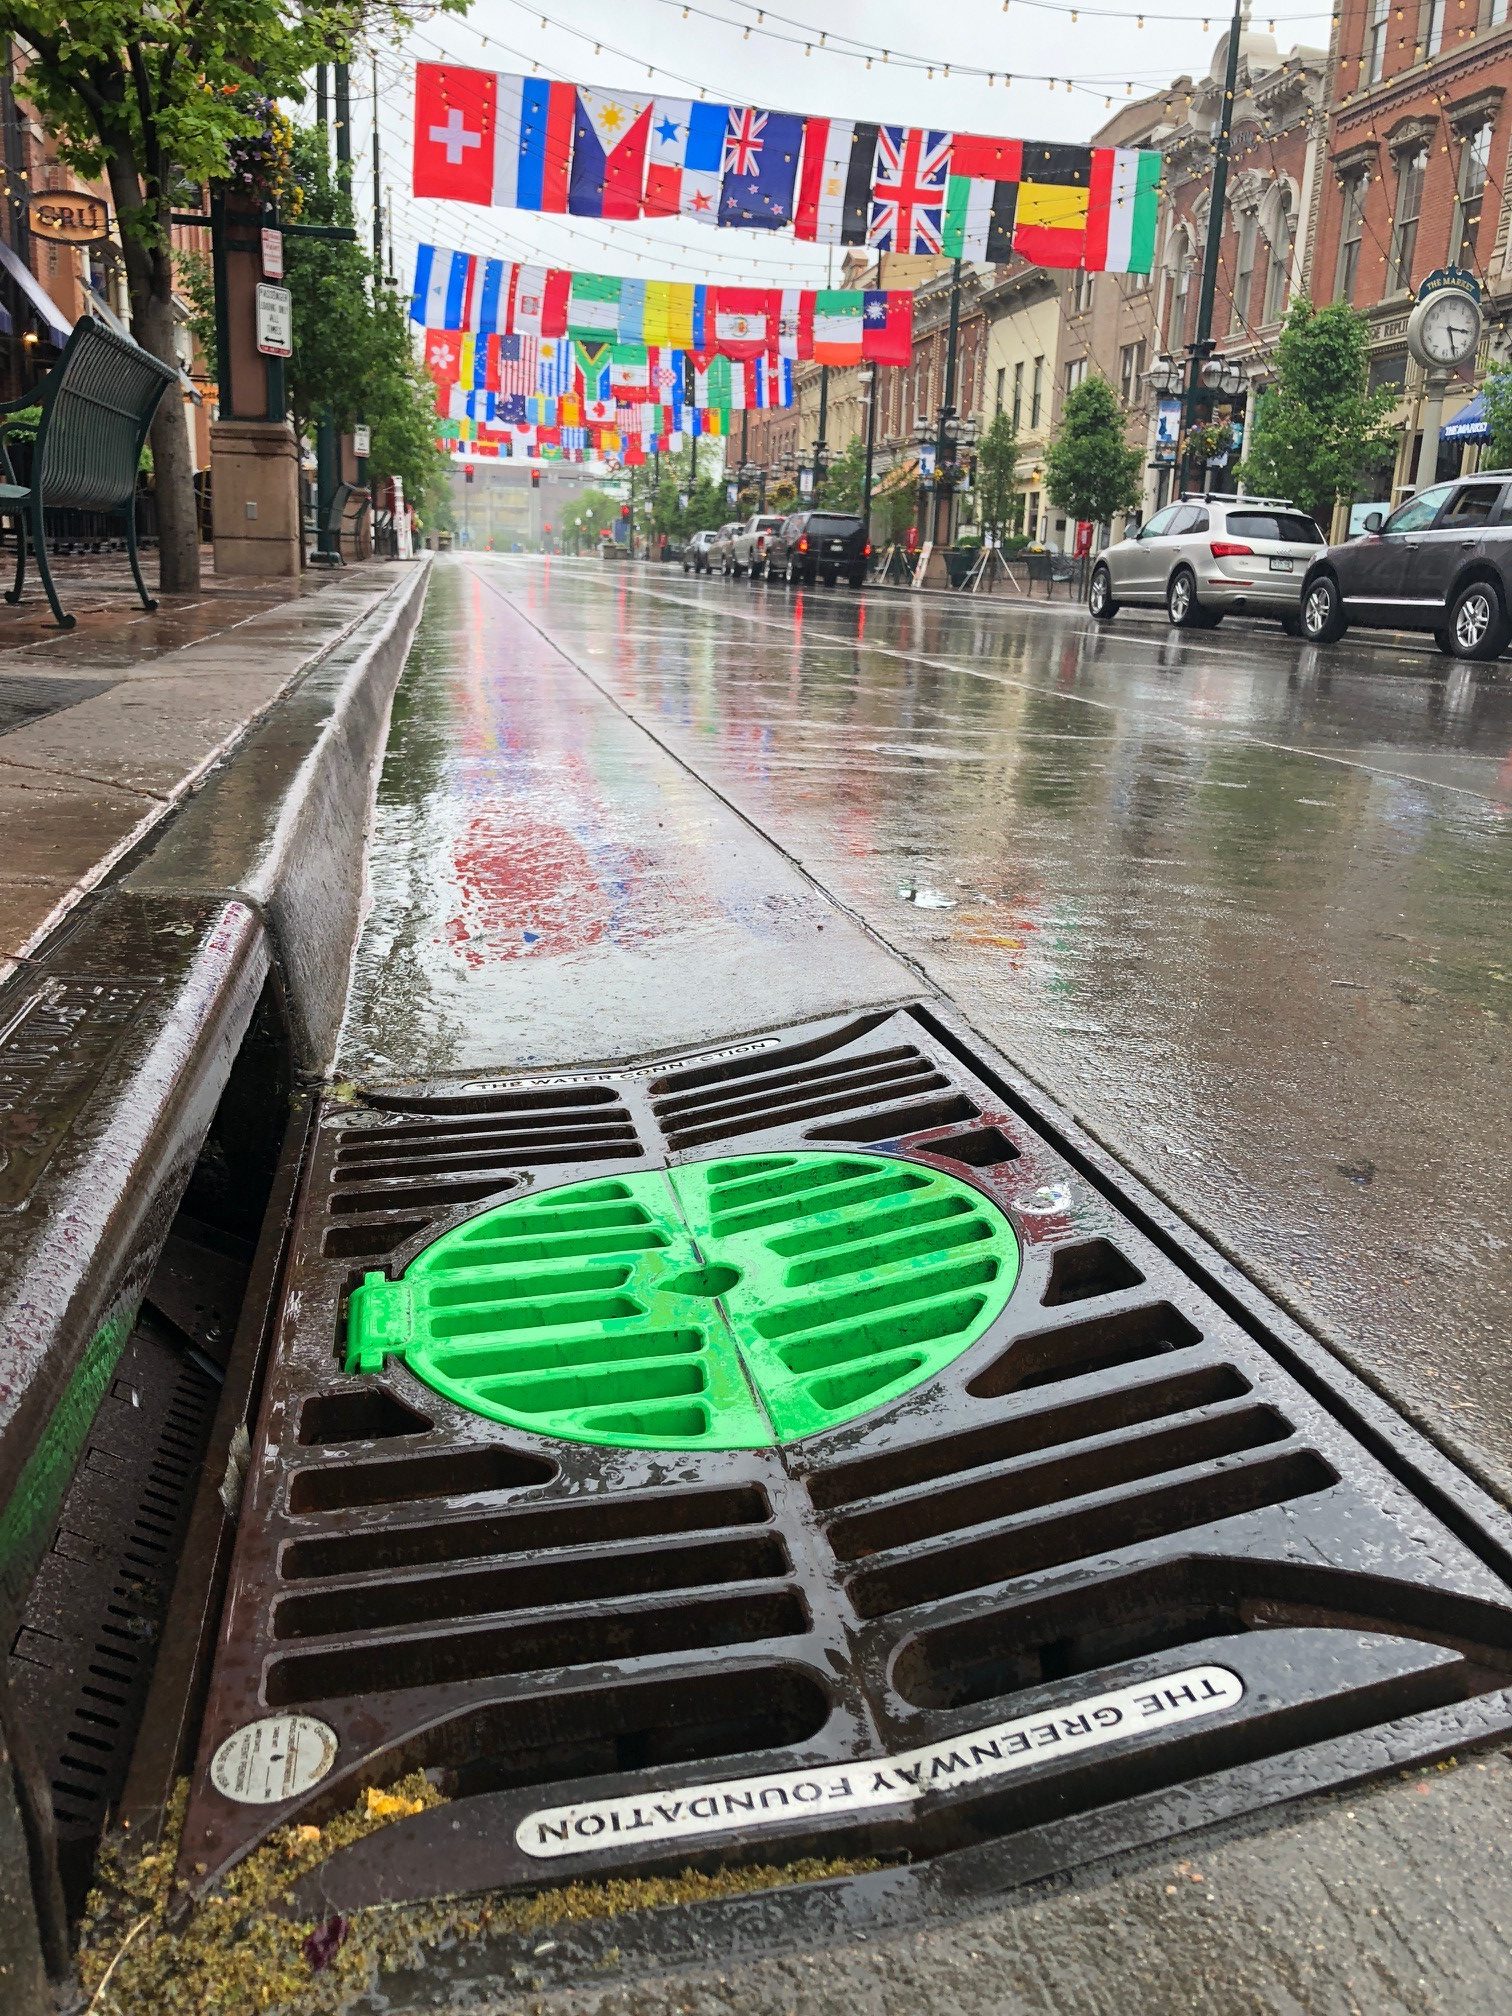 TGF combines efforts with Frog Creek Partners to promote the installation of gutter bins in stormwater collection devices throughout Colorado